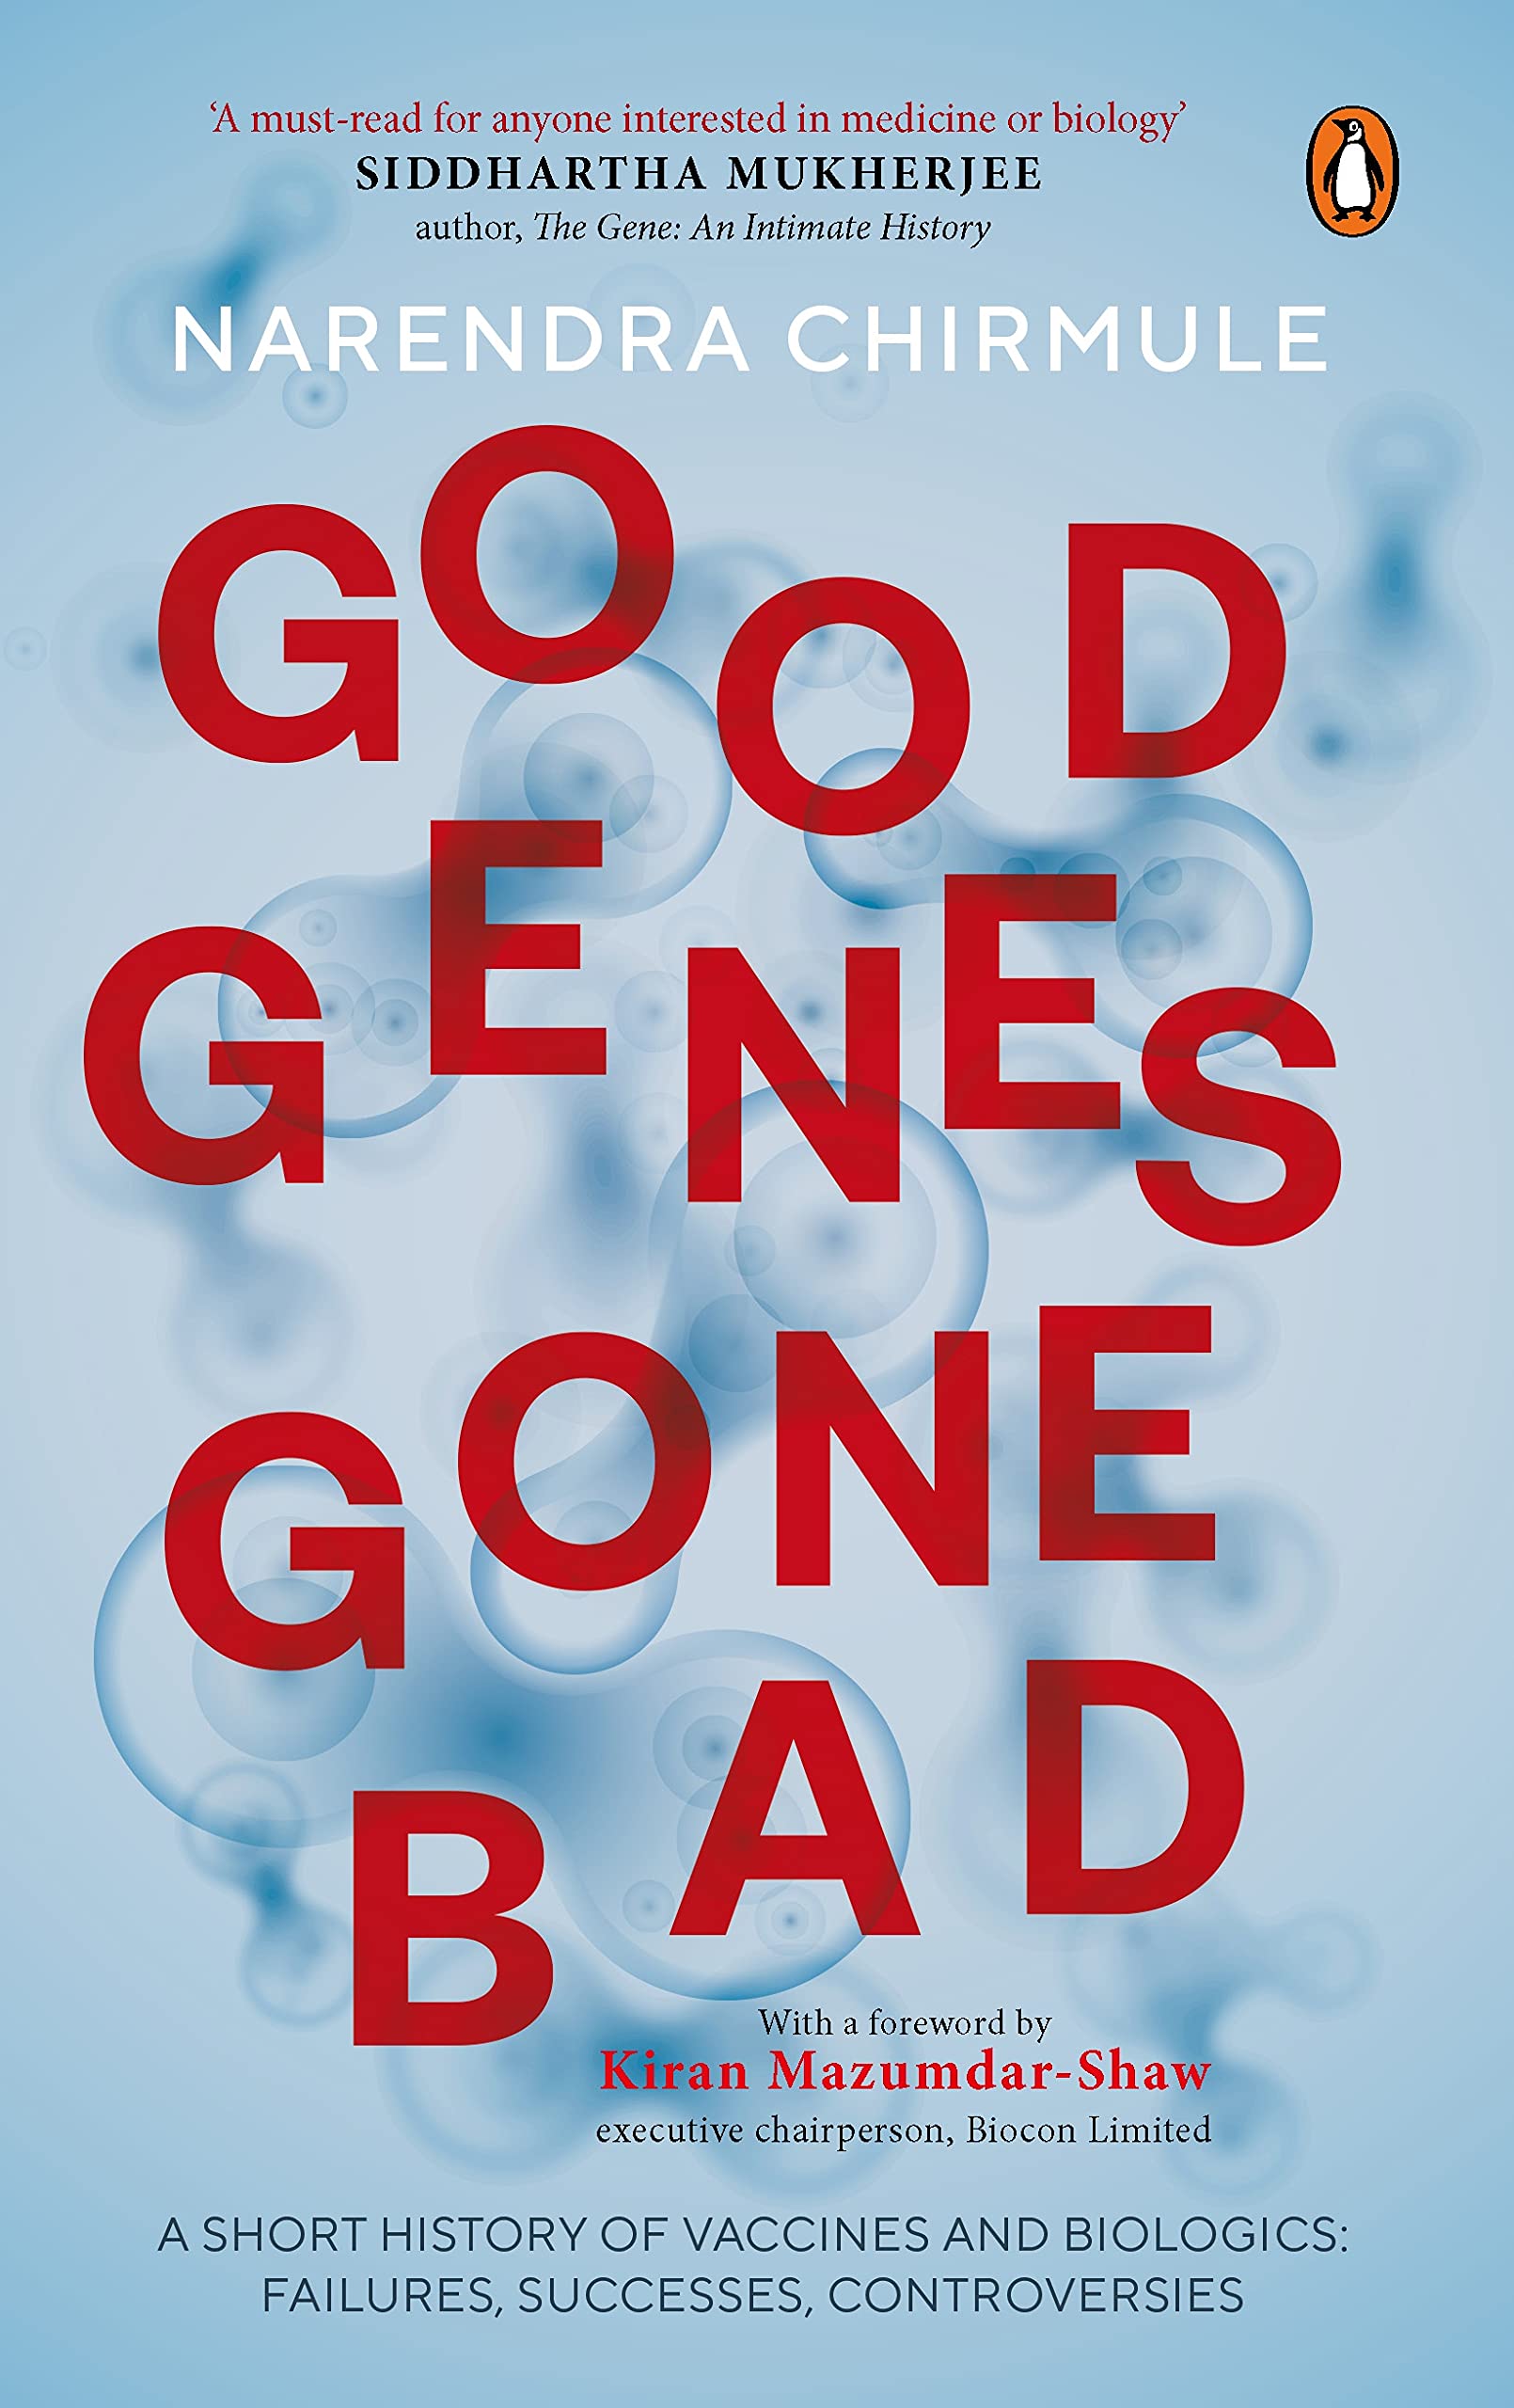 Gone　Short　Biological　Bad　and　Genes　History　Vaccines　of　Drugs　Good　A